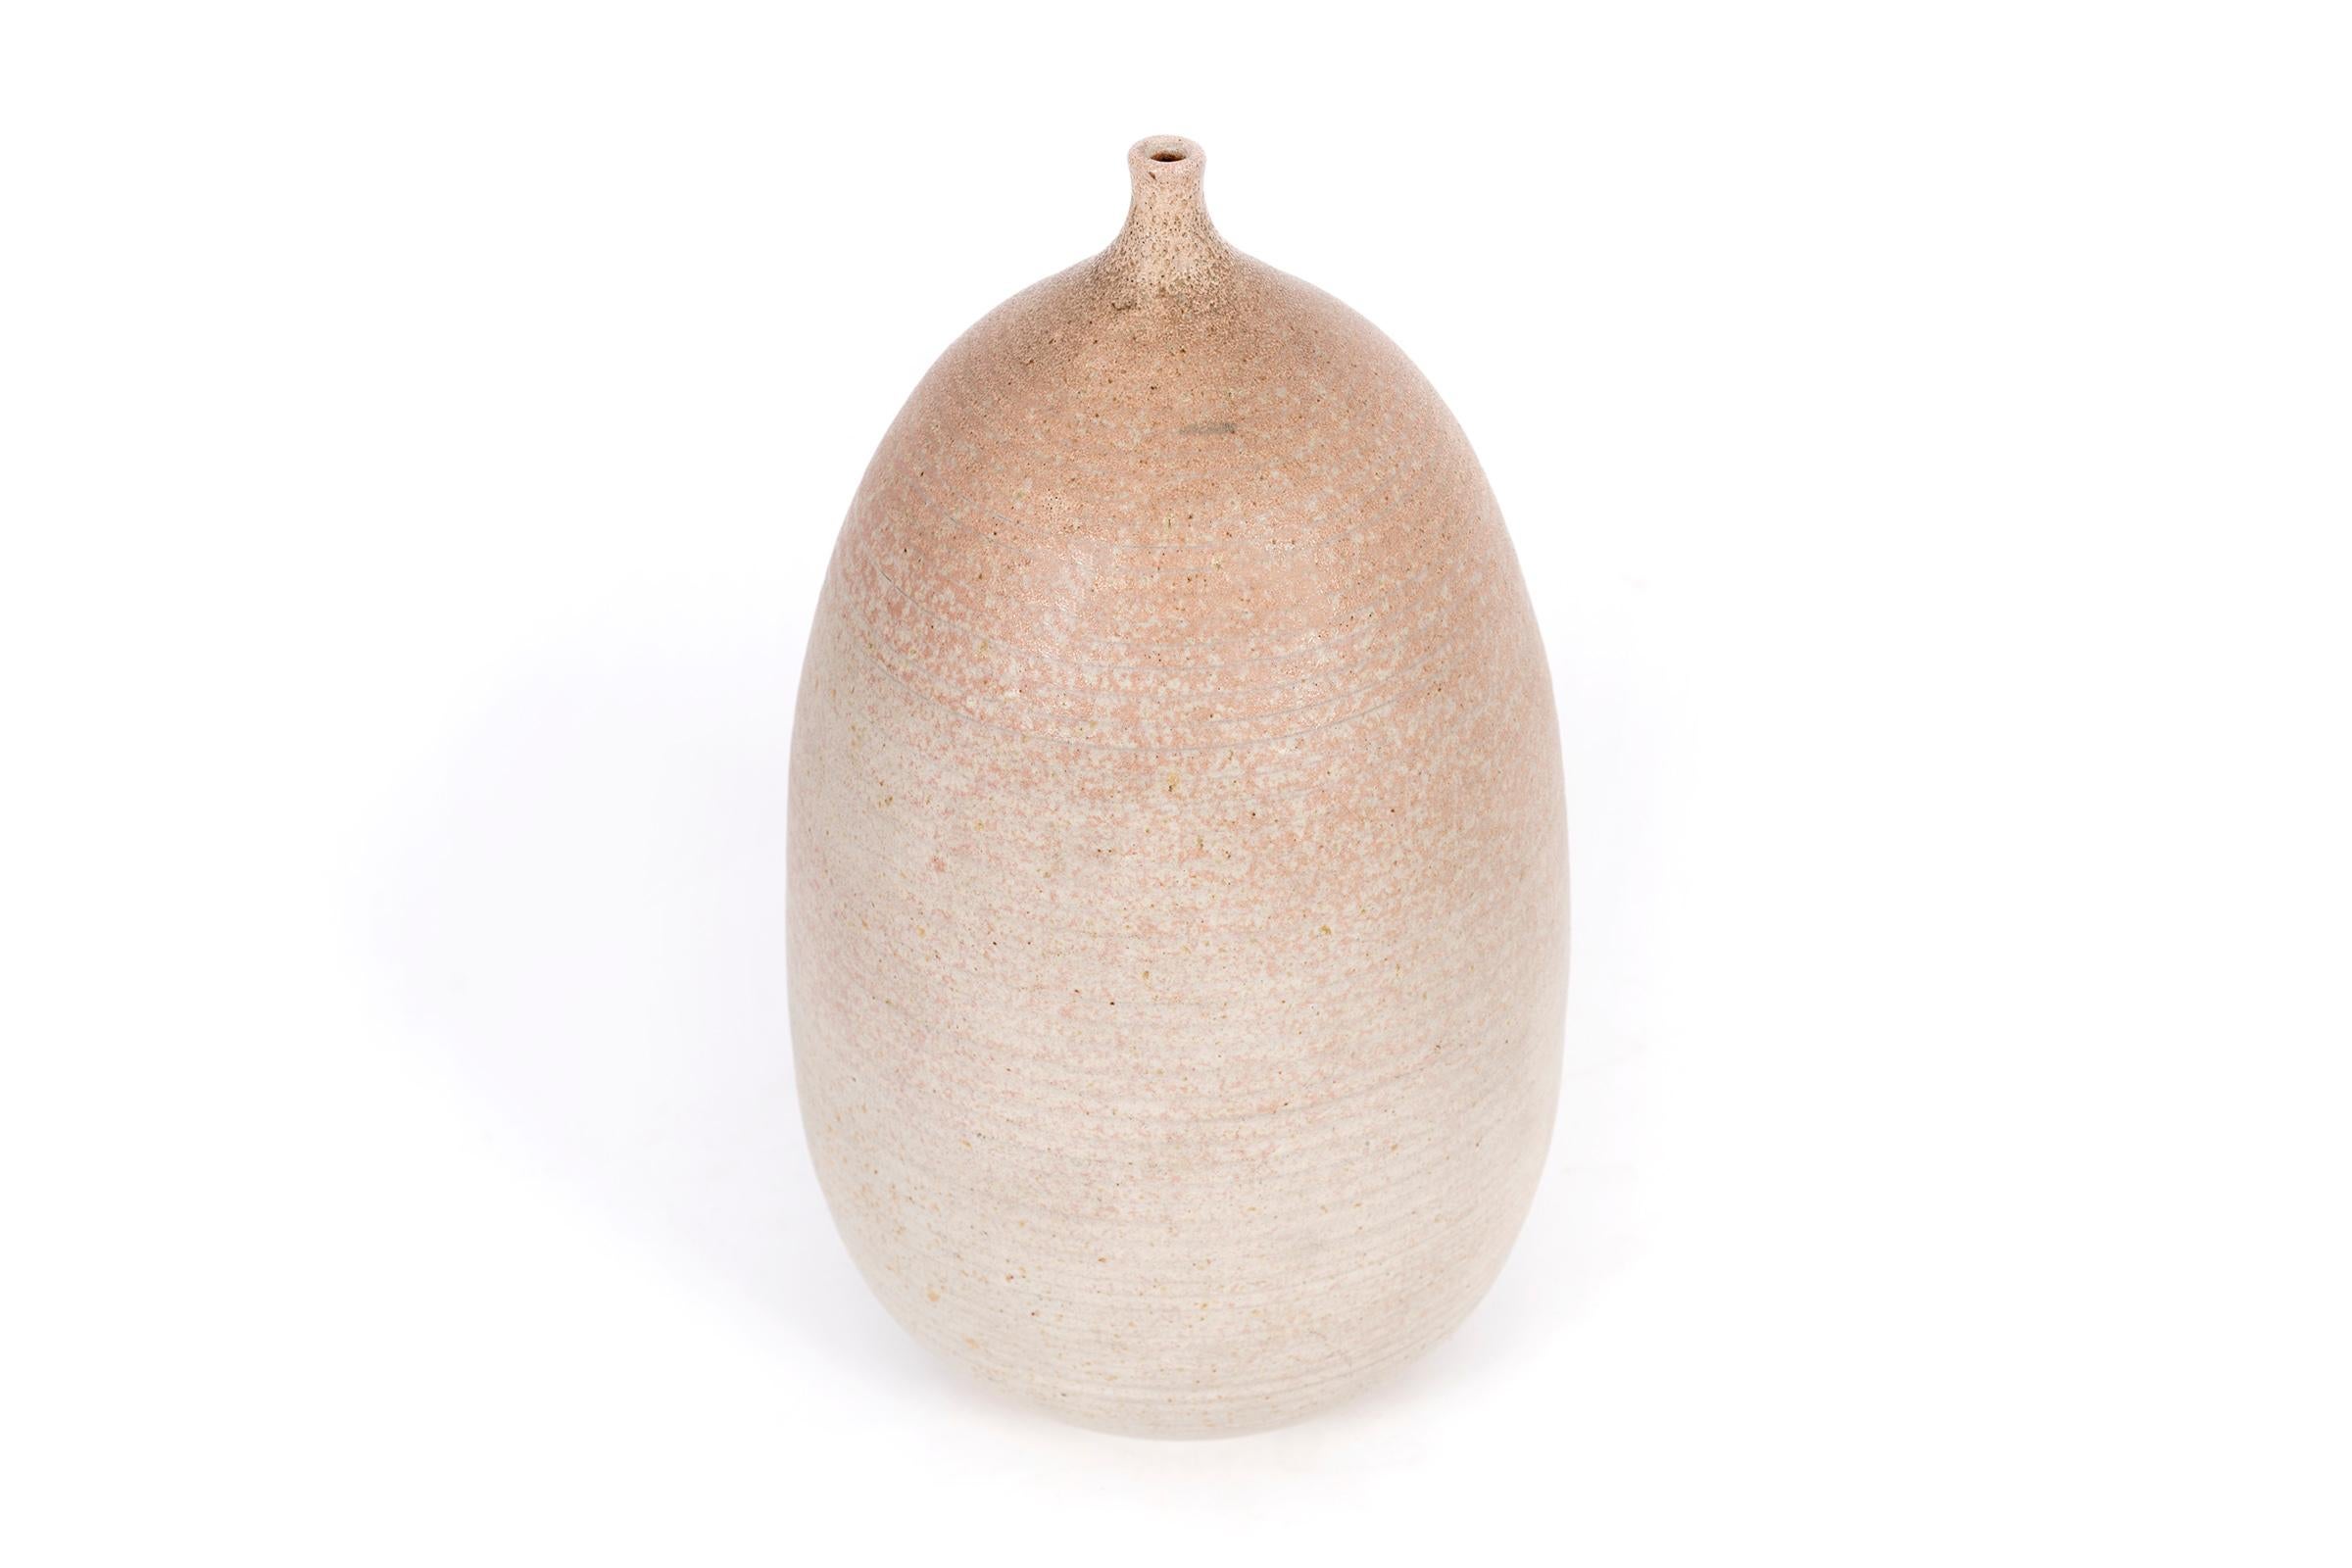 Clyde Burt speckled gourd-form weed vase in blush ombre glazed stoneware.
Signed to underside: [CB].
American, circa 1965.